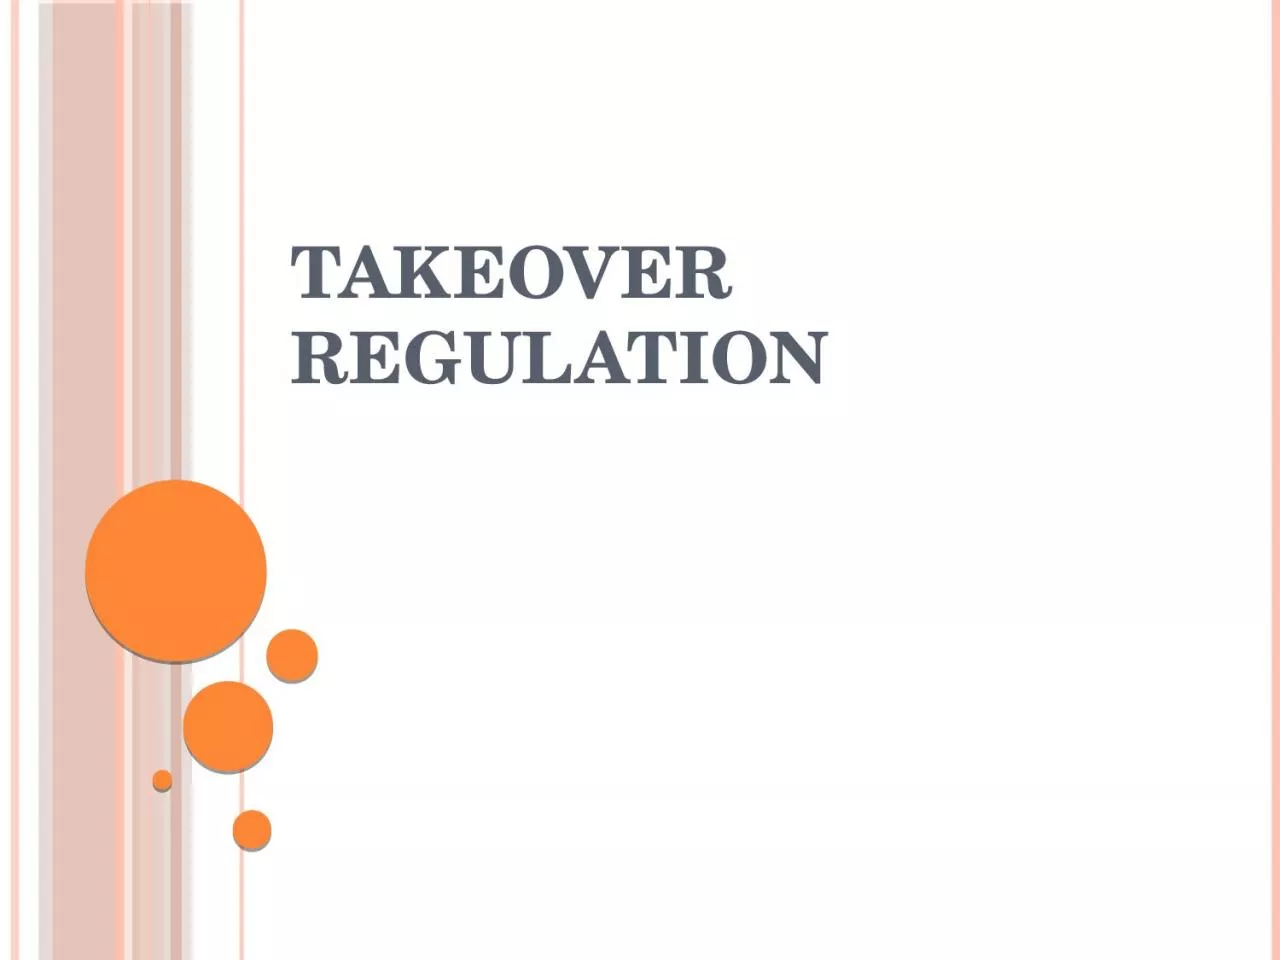 Takeover Regulation Overview